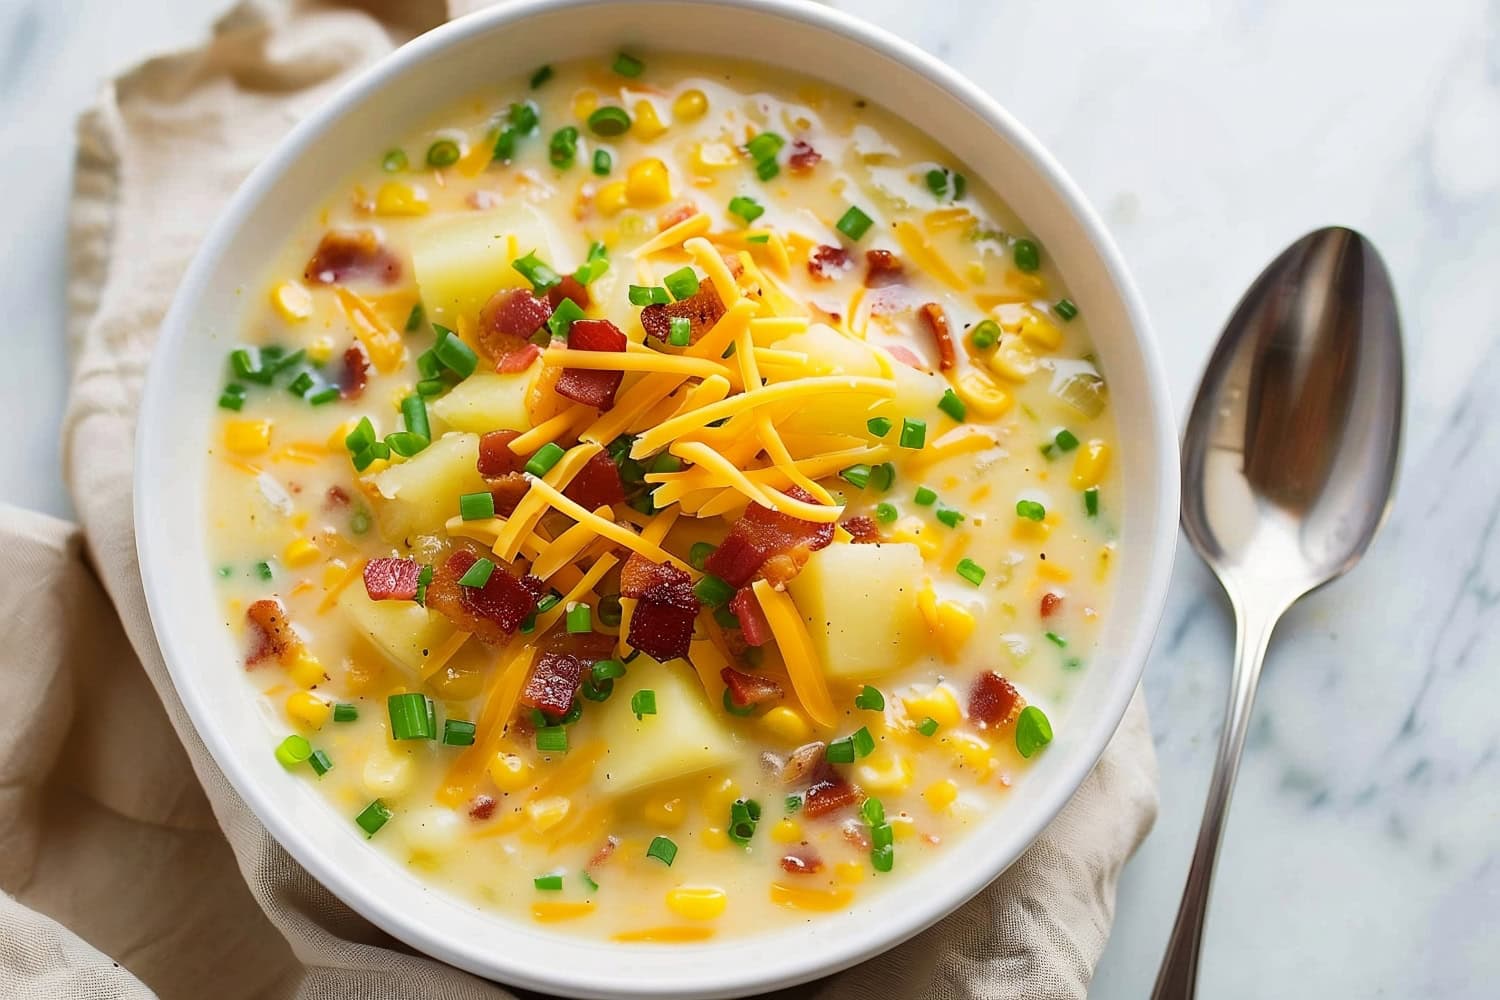 Overhead view of corn chowder with shredded cheese, bacon and potatoes.